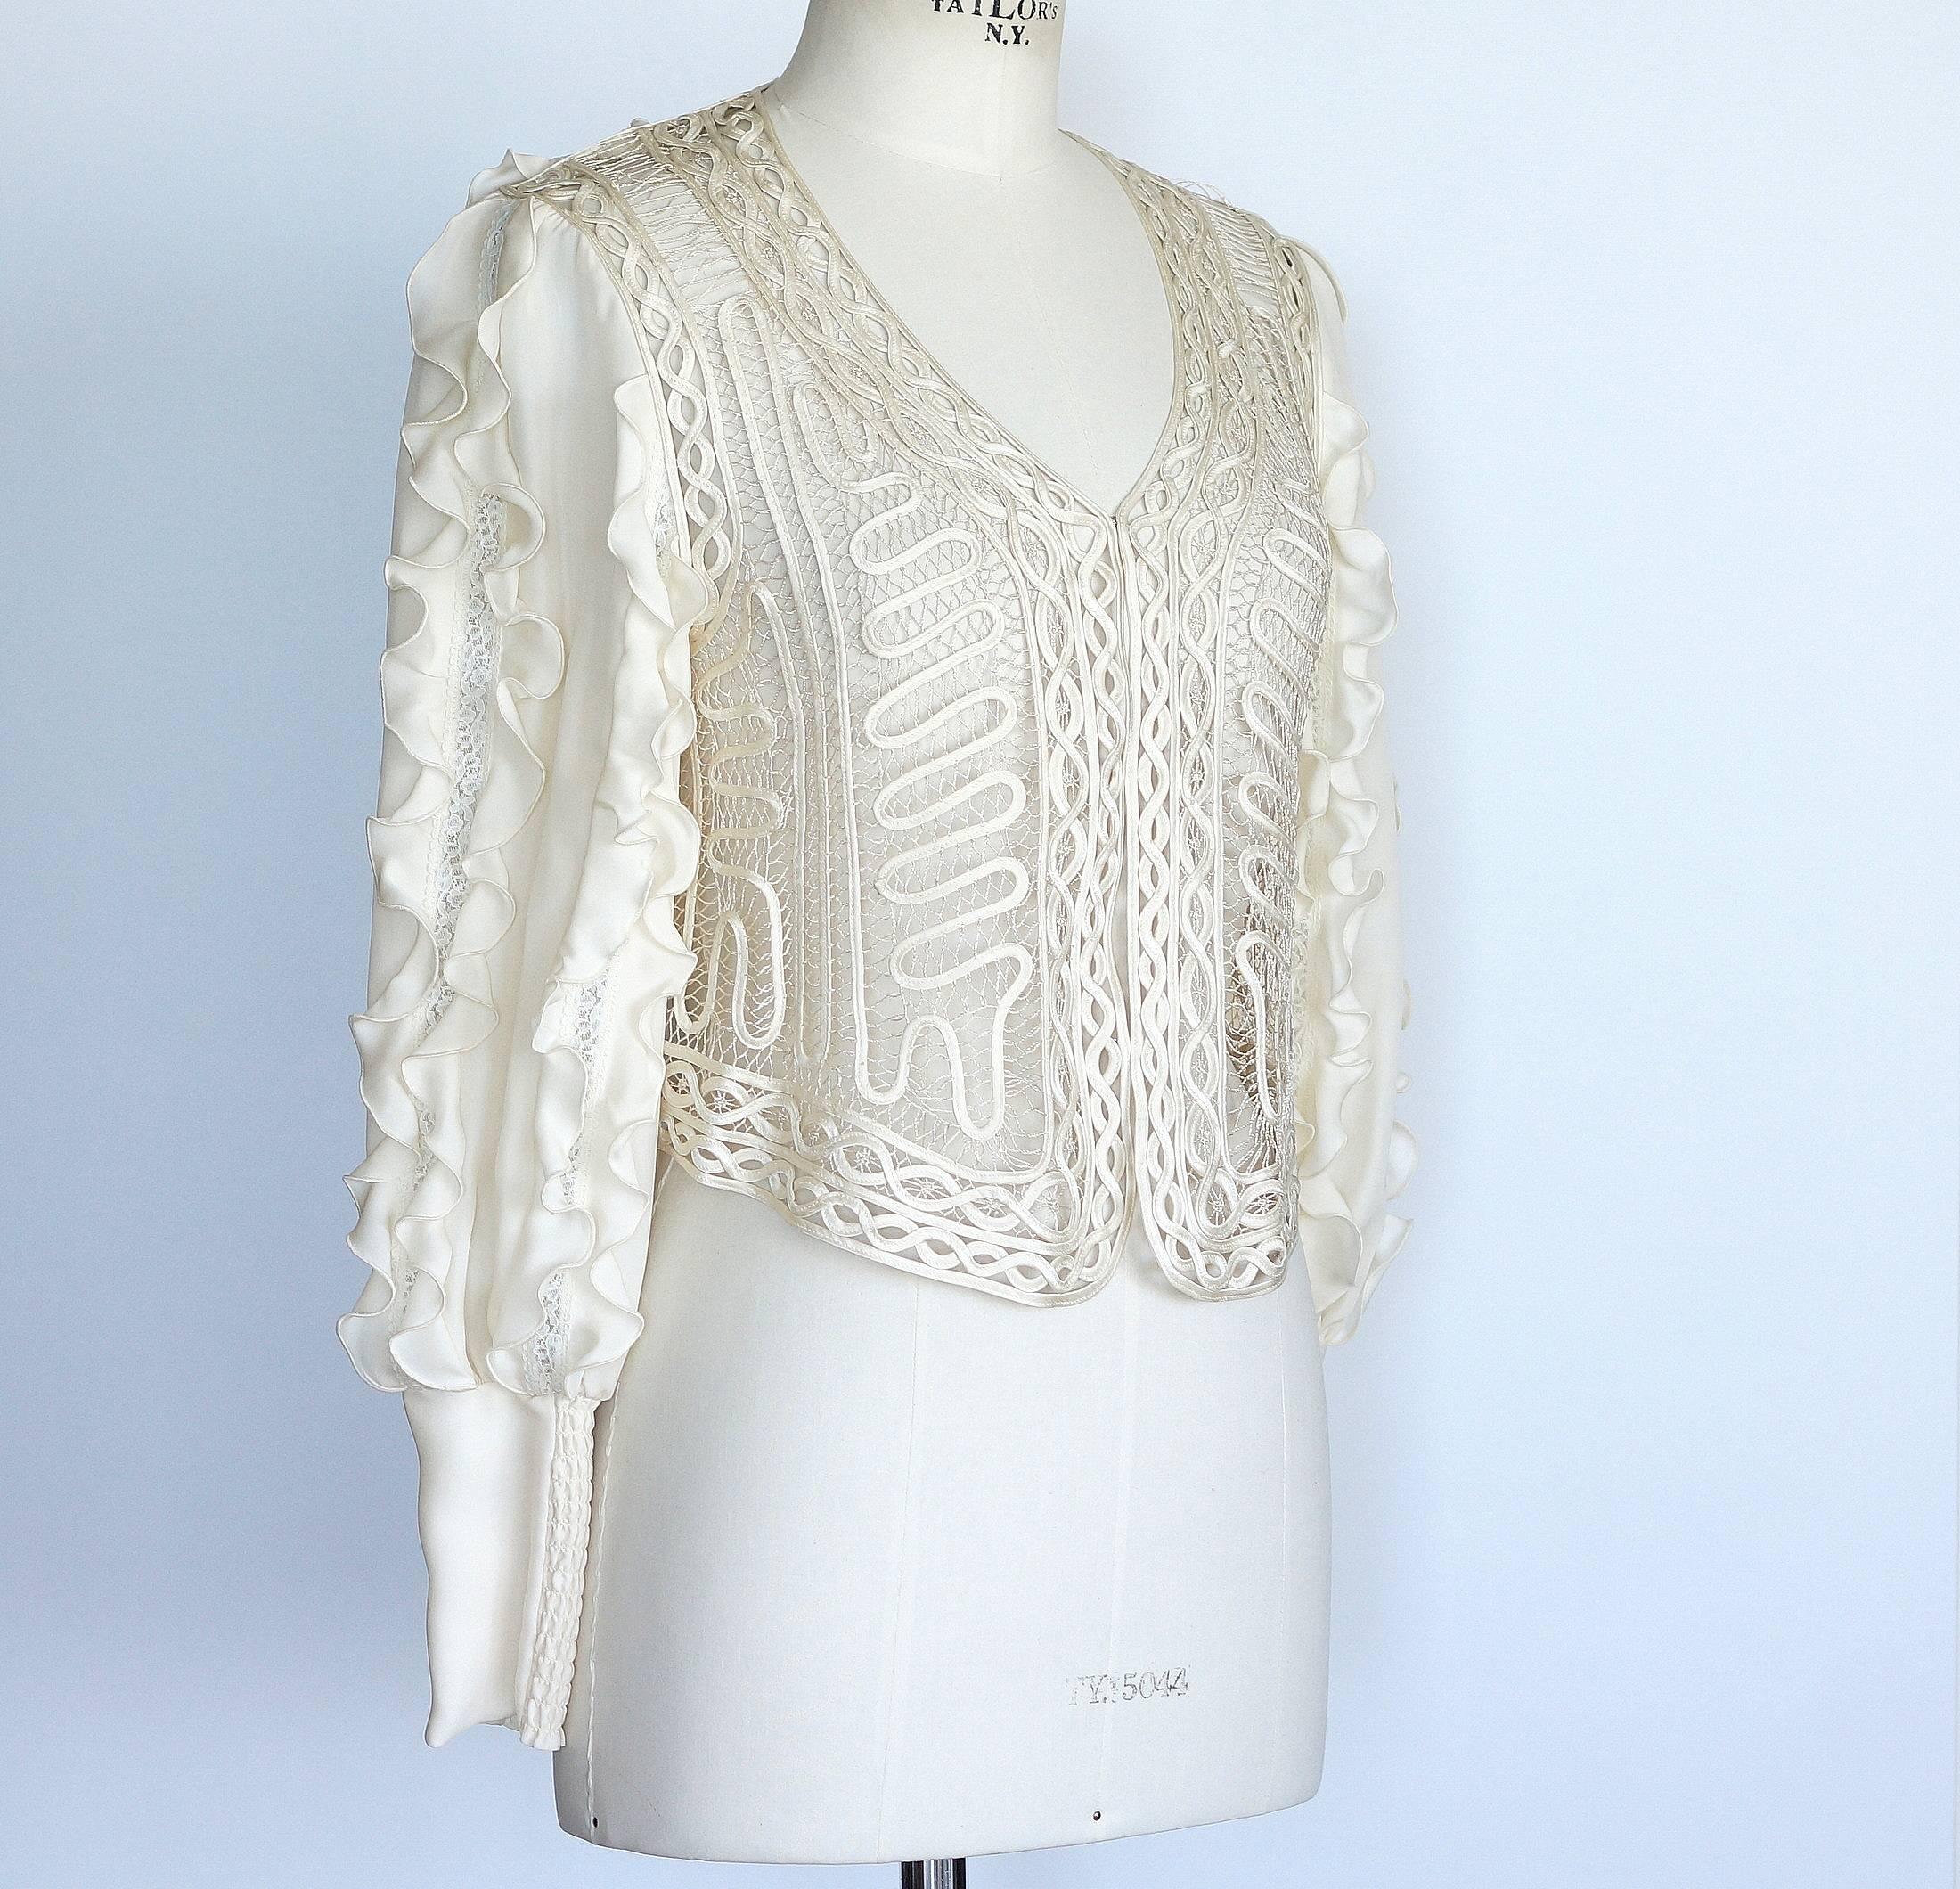 Guaranteed authentic HAUTE HIPPIE cream long sleeve V-neck detailed top.   
Vertical ruffles on sleeves with lace insets.
Front has soutache on open netting background.
Rear has 3 rows of vertical ruffles with lace insets.
Fabric is silk.
NEW or